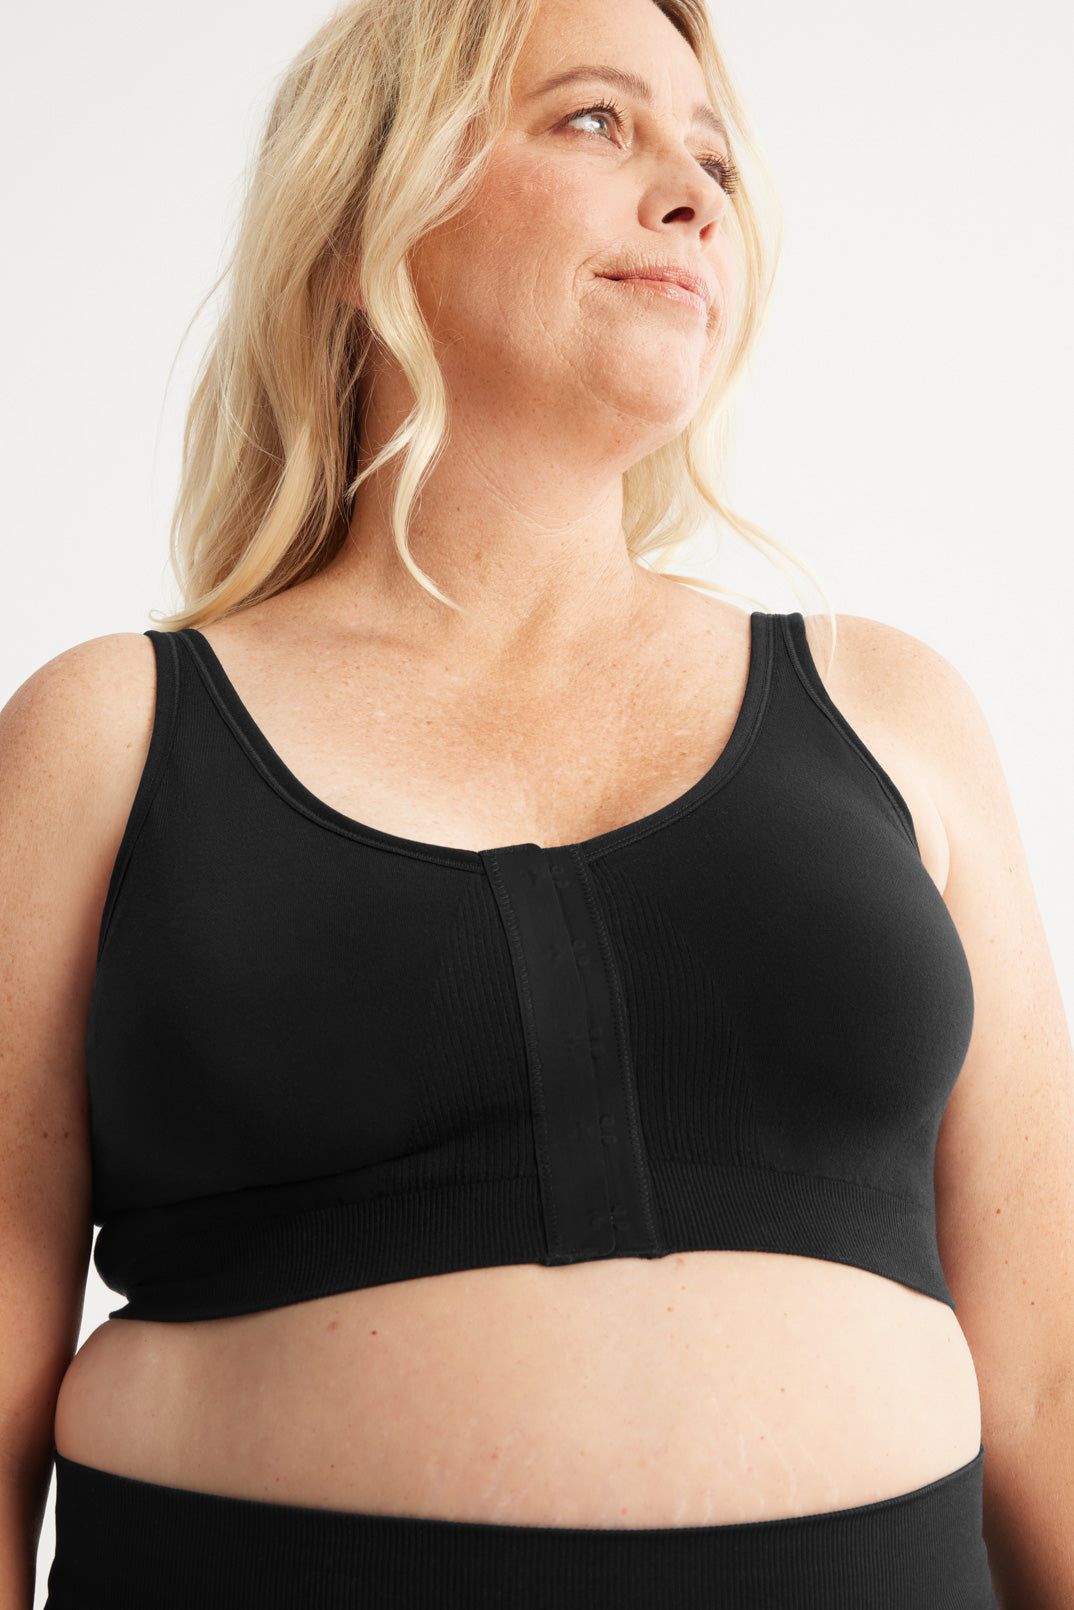 Mrat Clearance Sports Bras for Women High Support Wire-Free Large Breasts  Plus Size Bralette Wireless with Support and Lift Snap Front Bra Older Swim